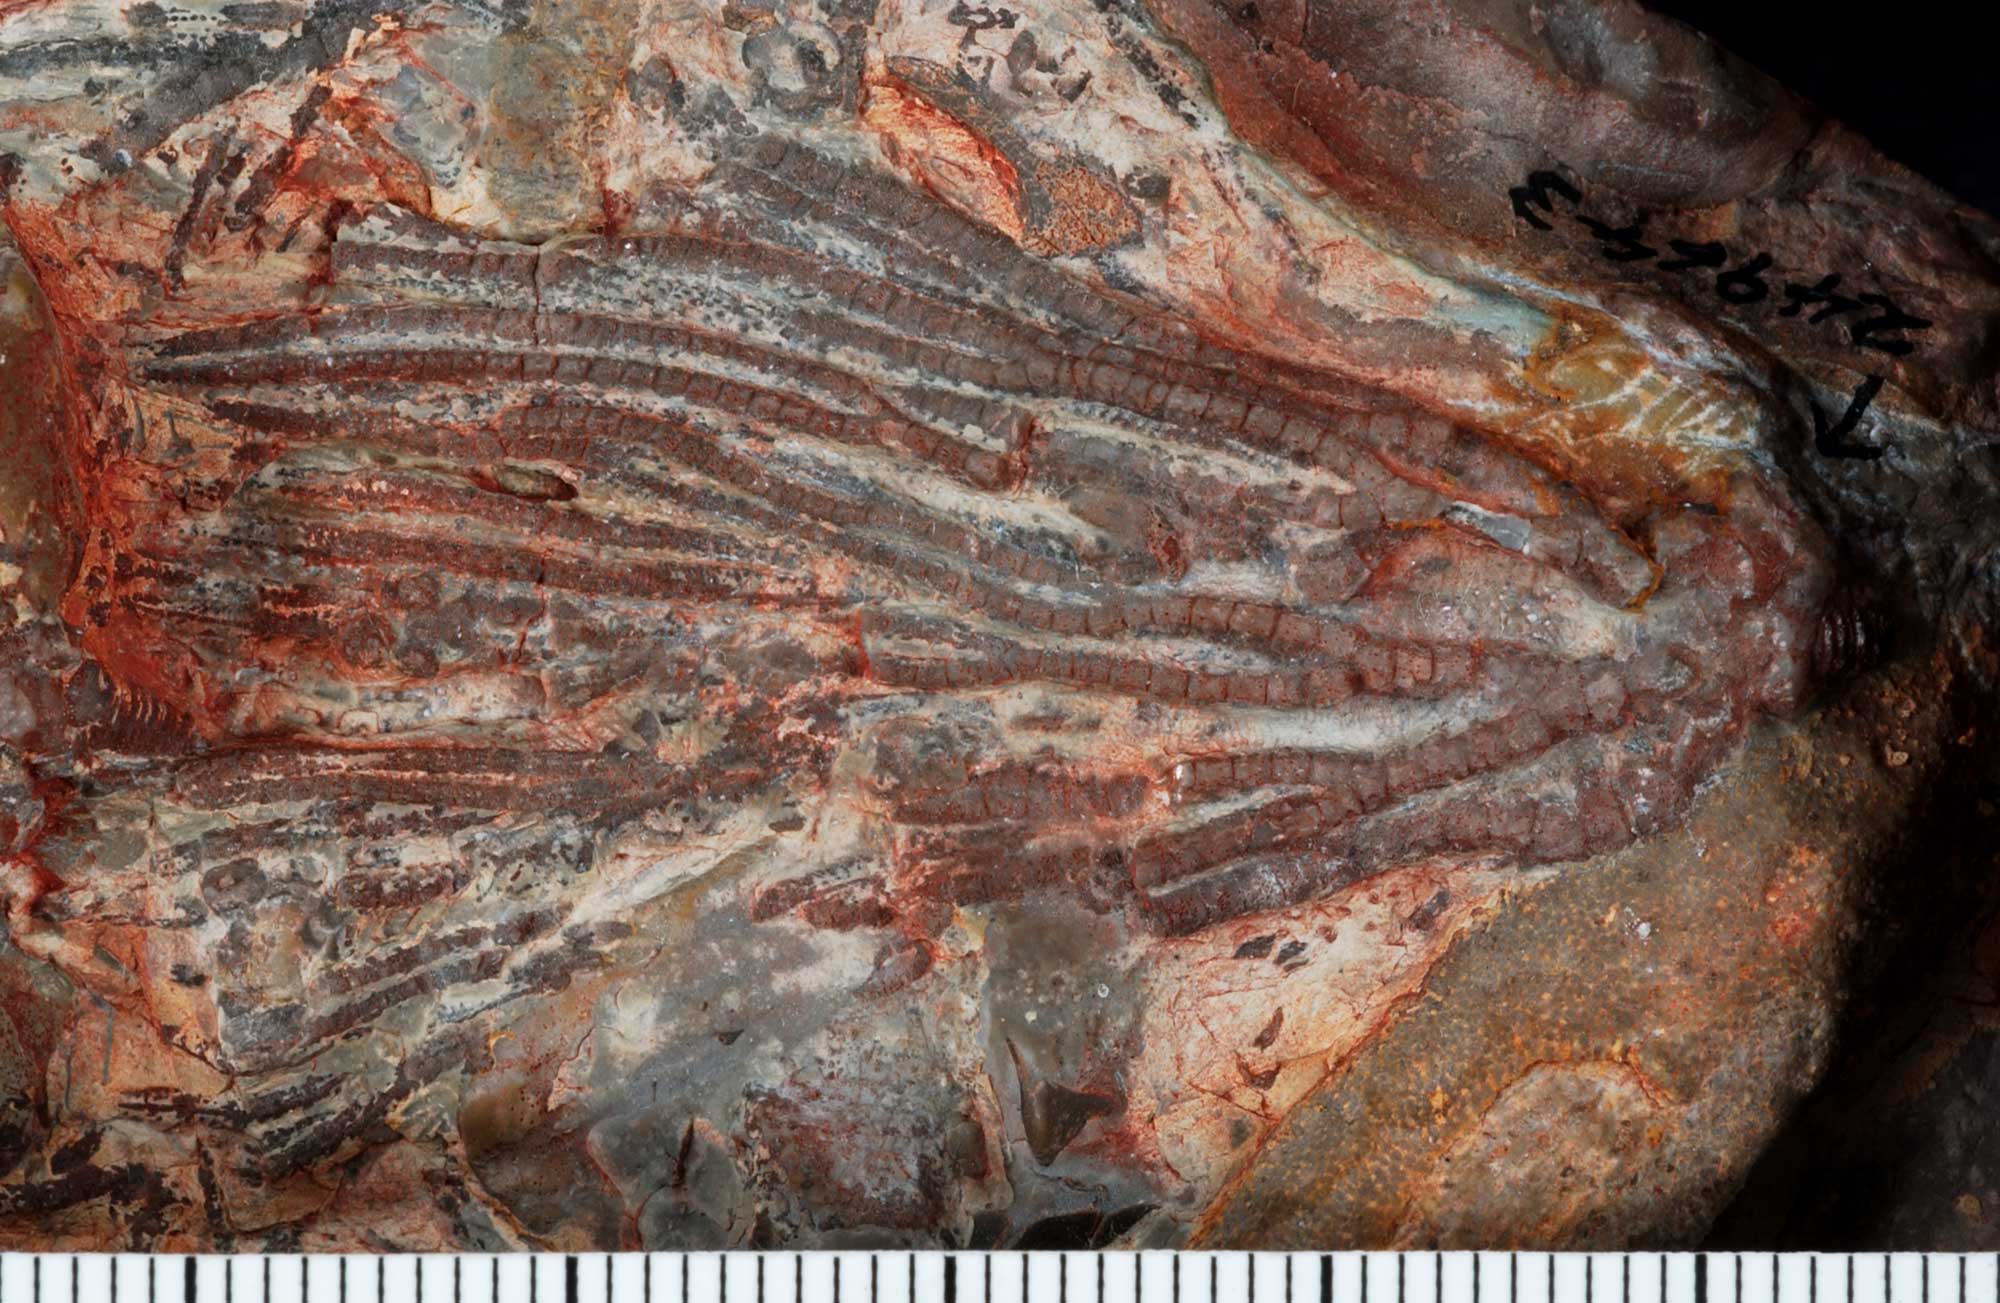 Photograph of an Orodvician crinoid from Utah. The fossil is deep red-brown and consists of may radiating arms. The specimen is oriented horizontally, with the base to the right and the tips of the arms to the left.